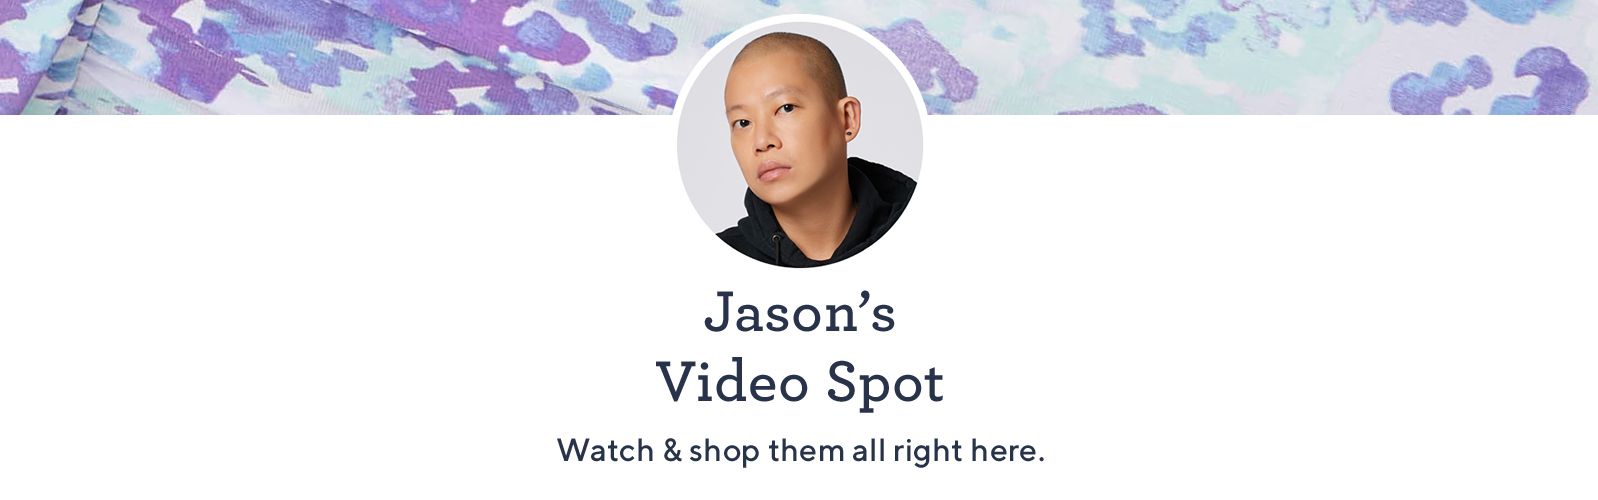 Jason's Video Spot. Watch & shop them all right here.